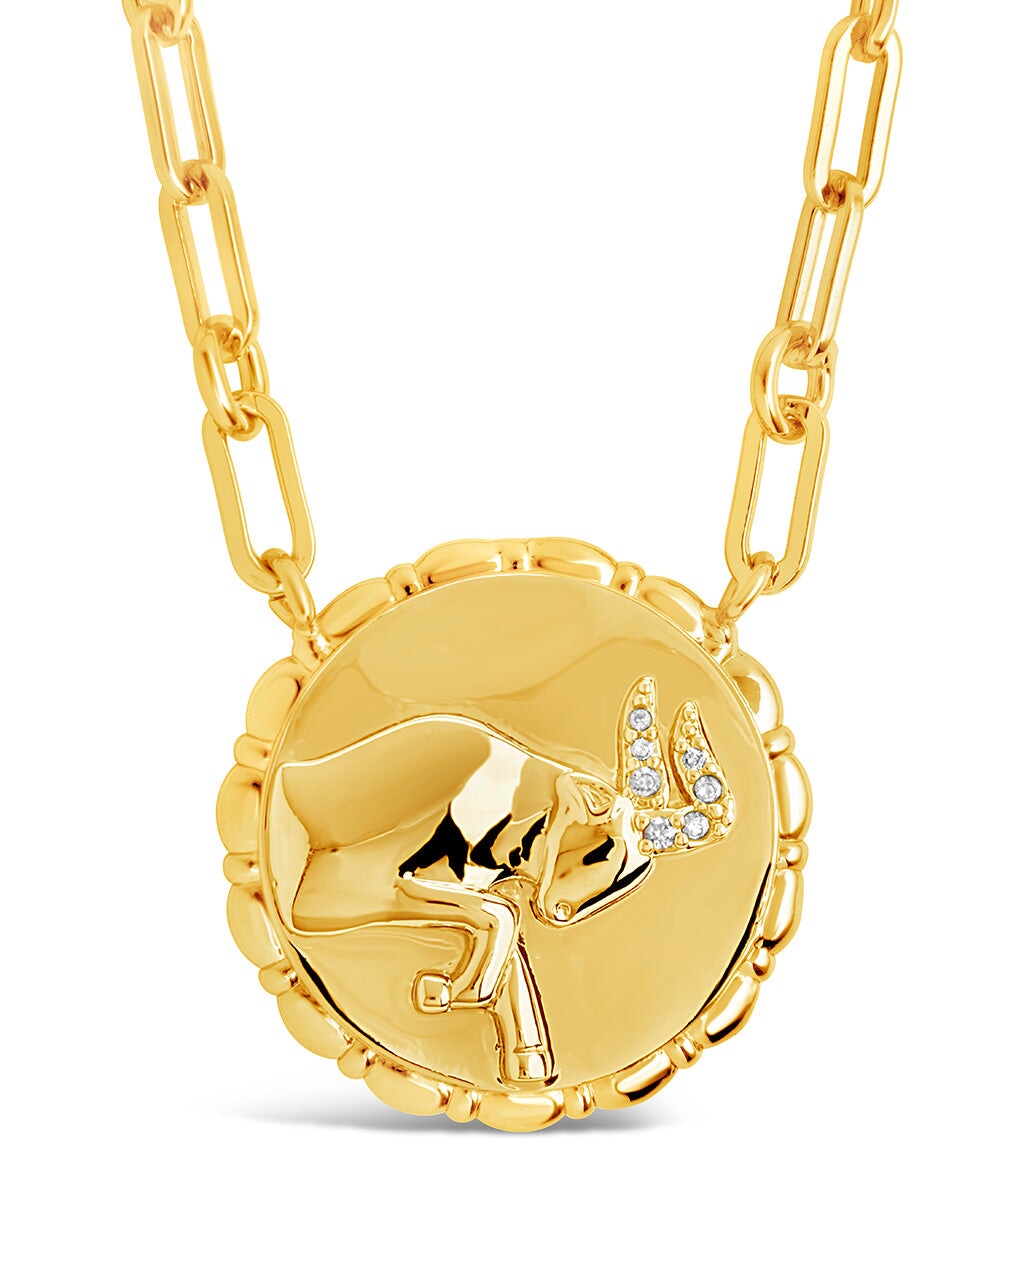 Bold Link Zodiac Necklace Necklace Sterling Forever Gold Taurus (Apr 20 - May 20) 